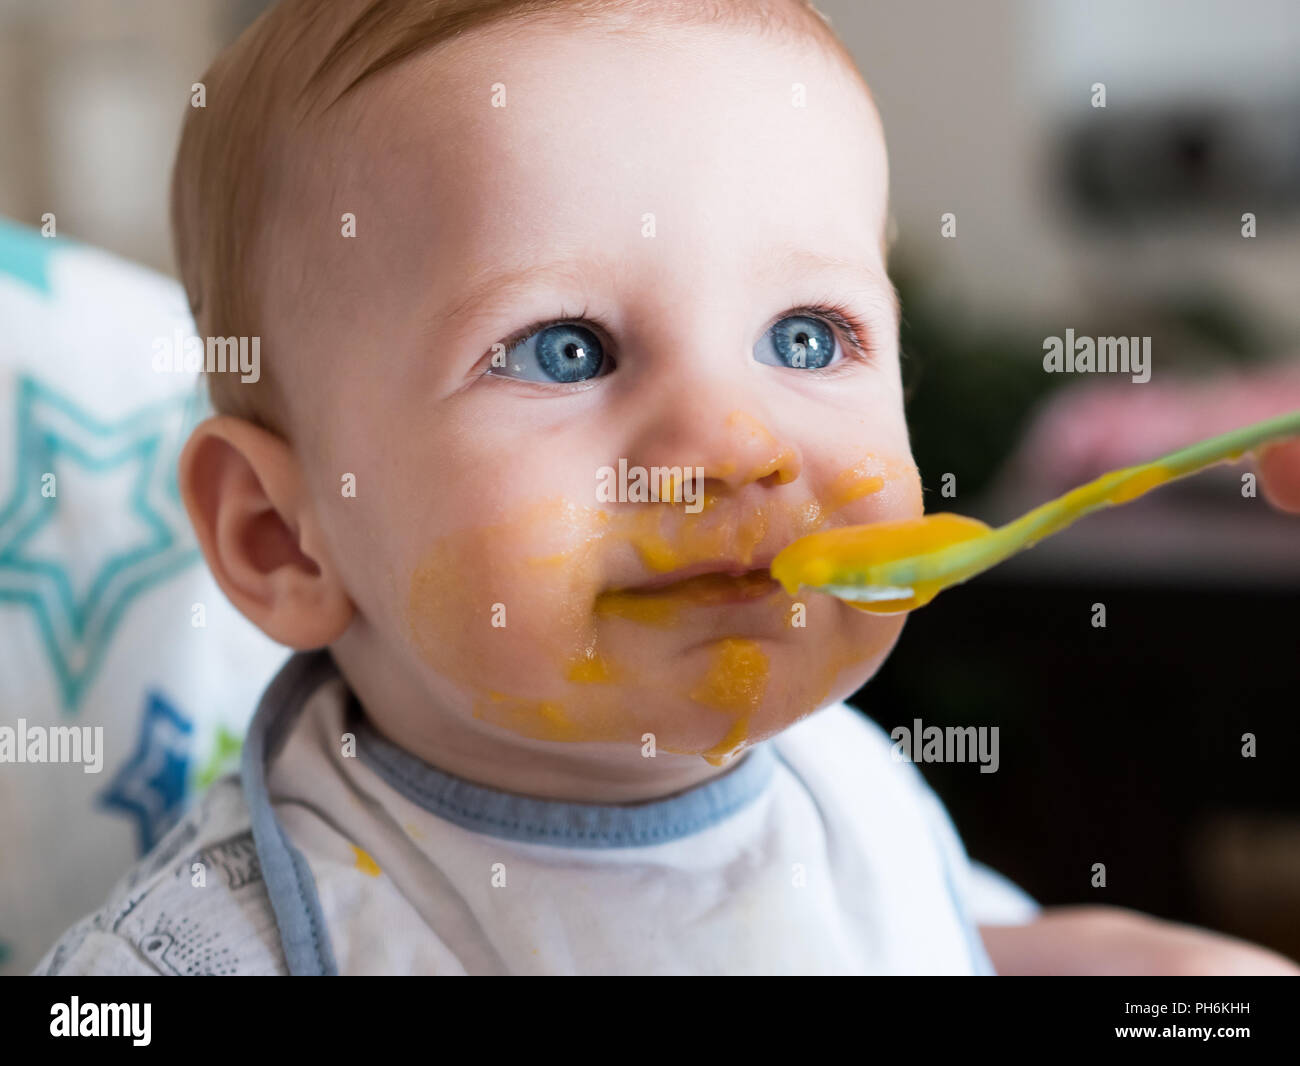 Mother feeding cute baby boy with blue eyes close up Stock Photo